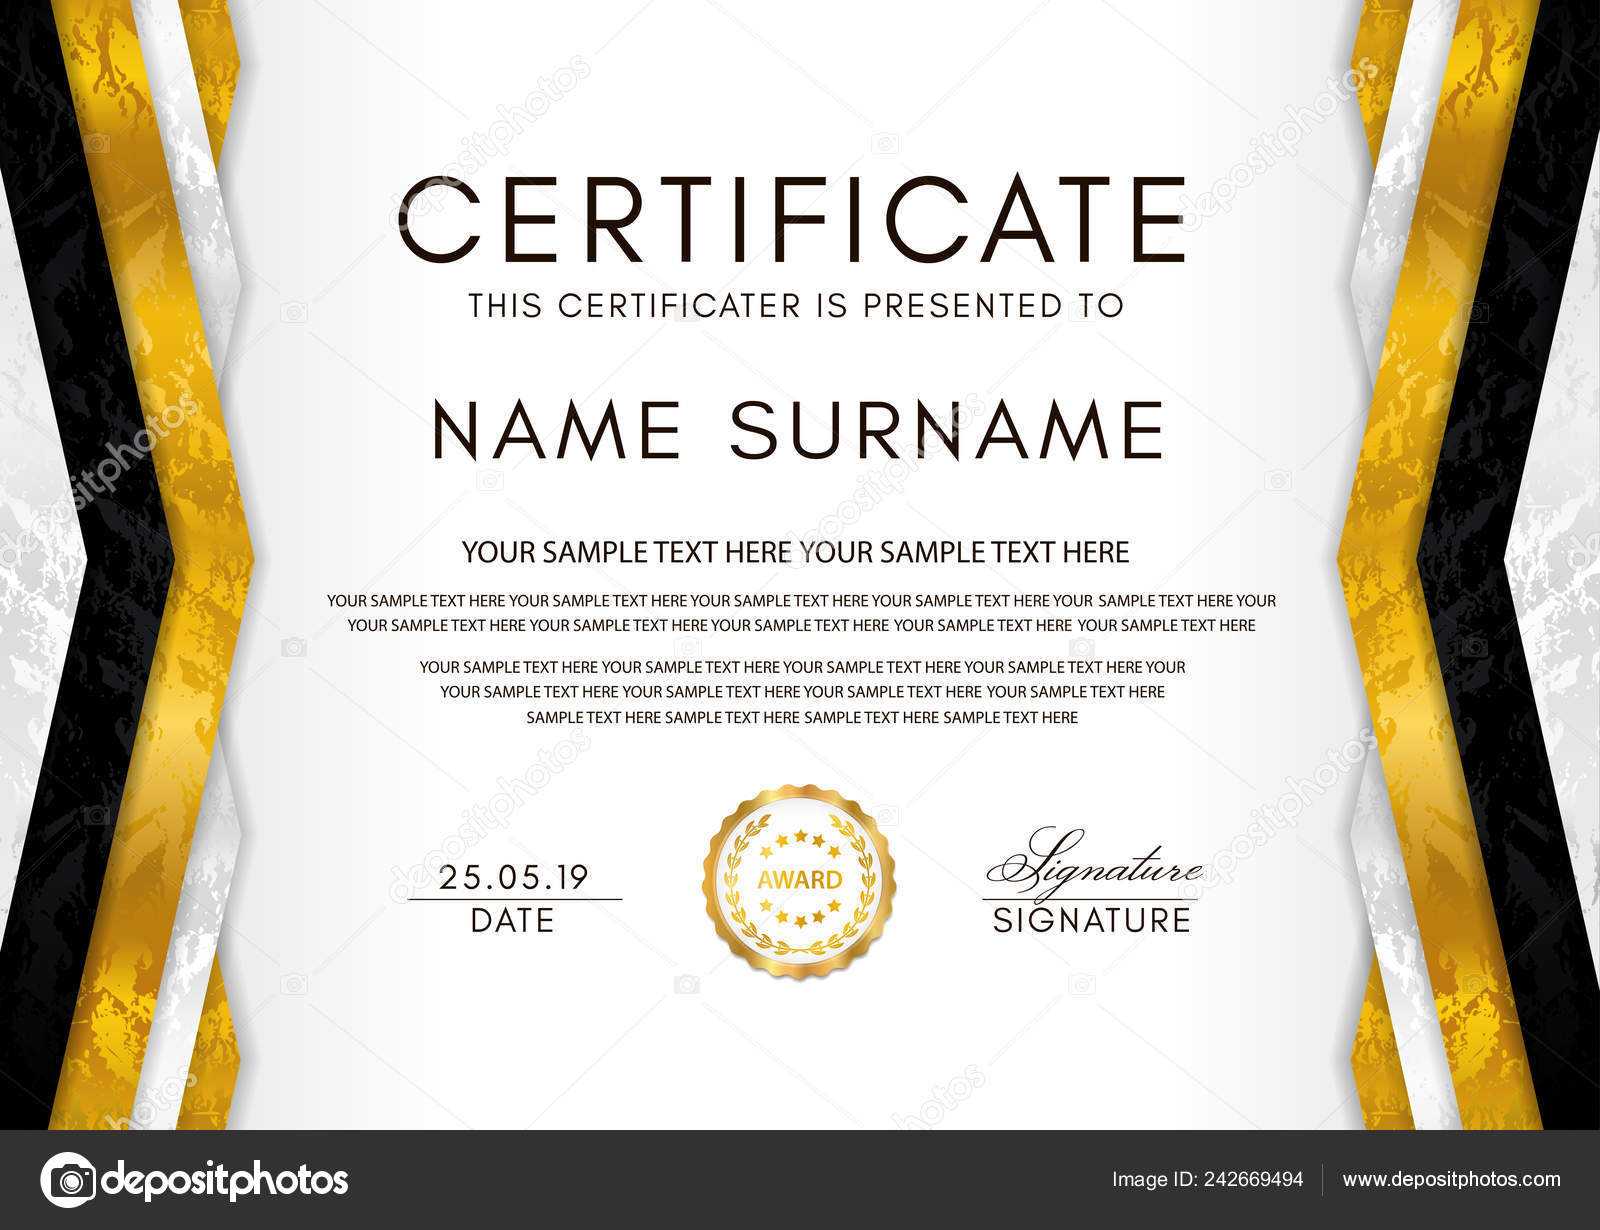 Certificate Template Geometry Frame Gold Badge White With Award Of Excellence Certificate Template